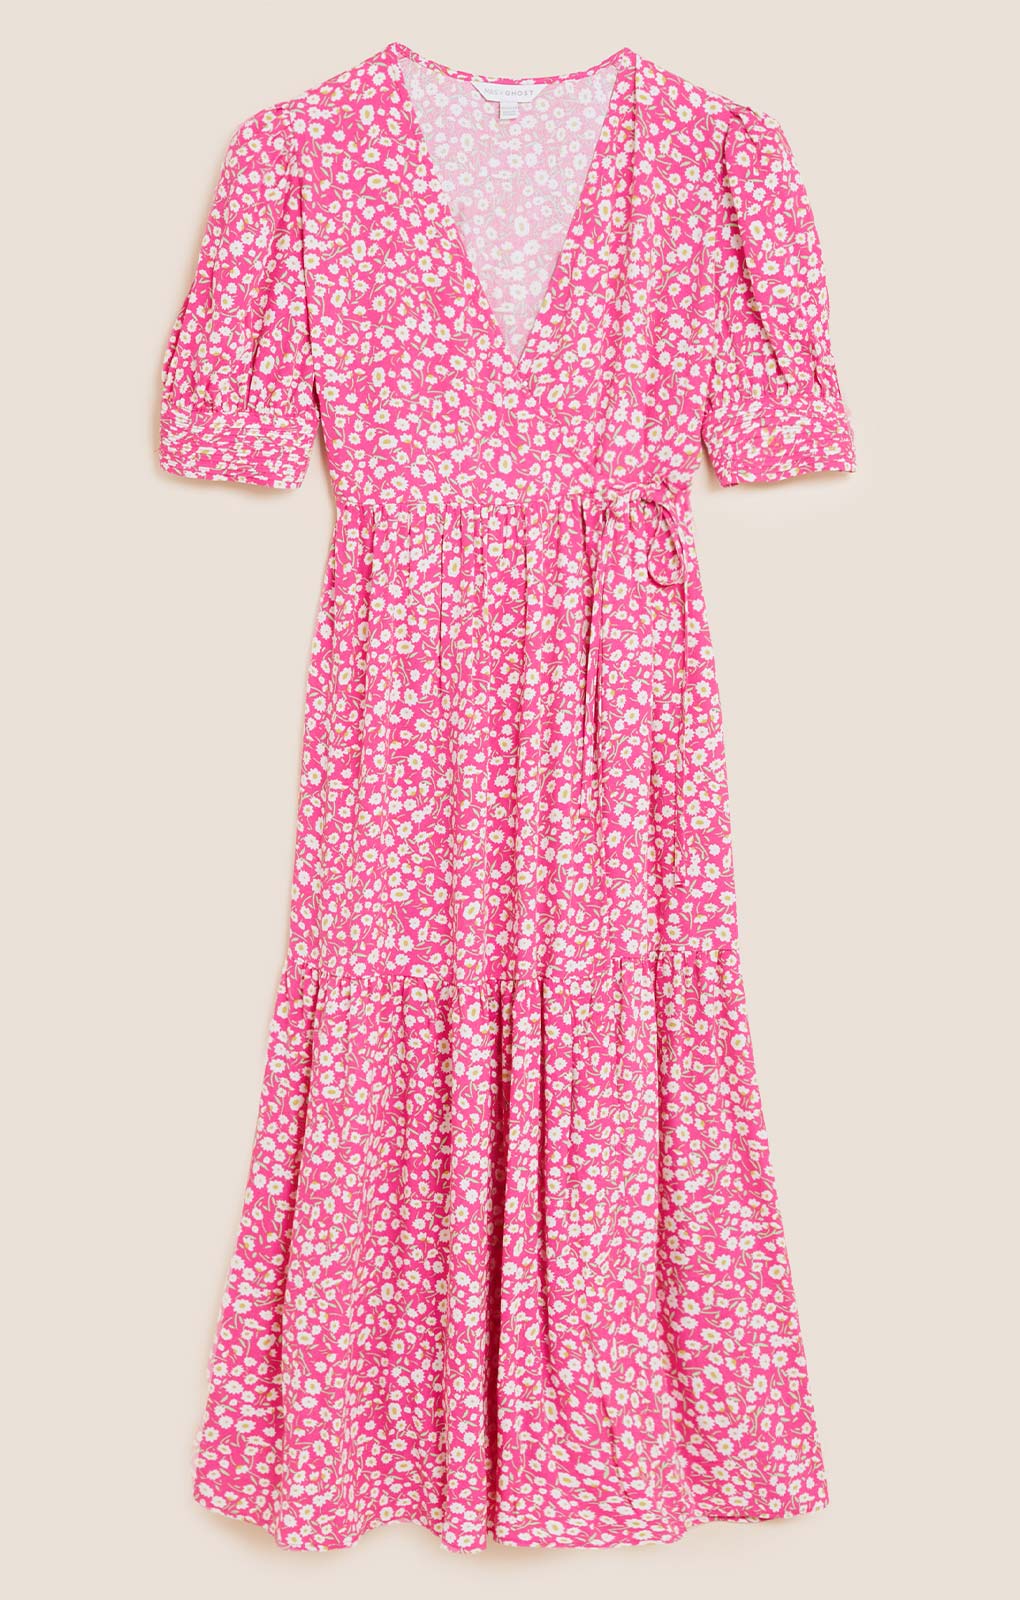 M&S X GHOST Ditsy Smocked Midi Dress product image